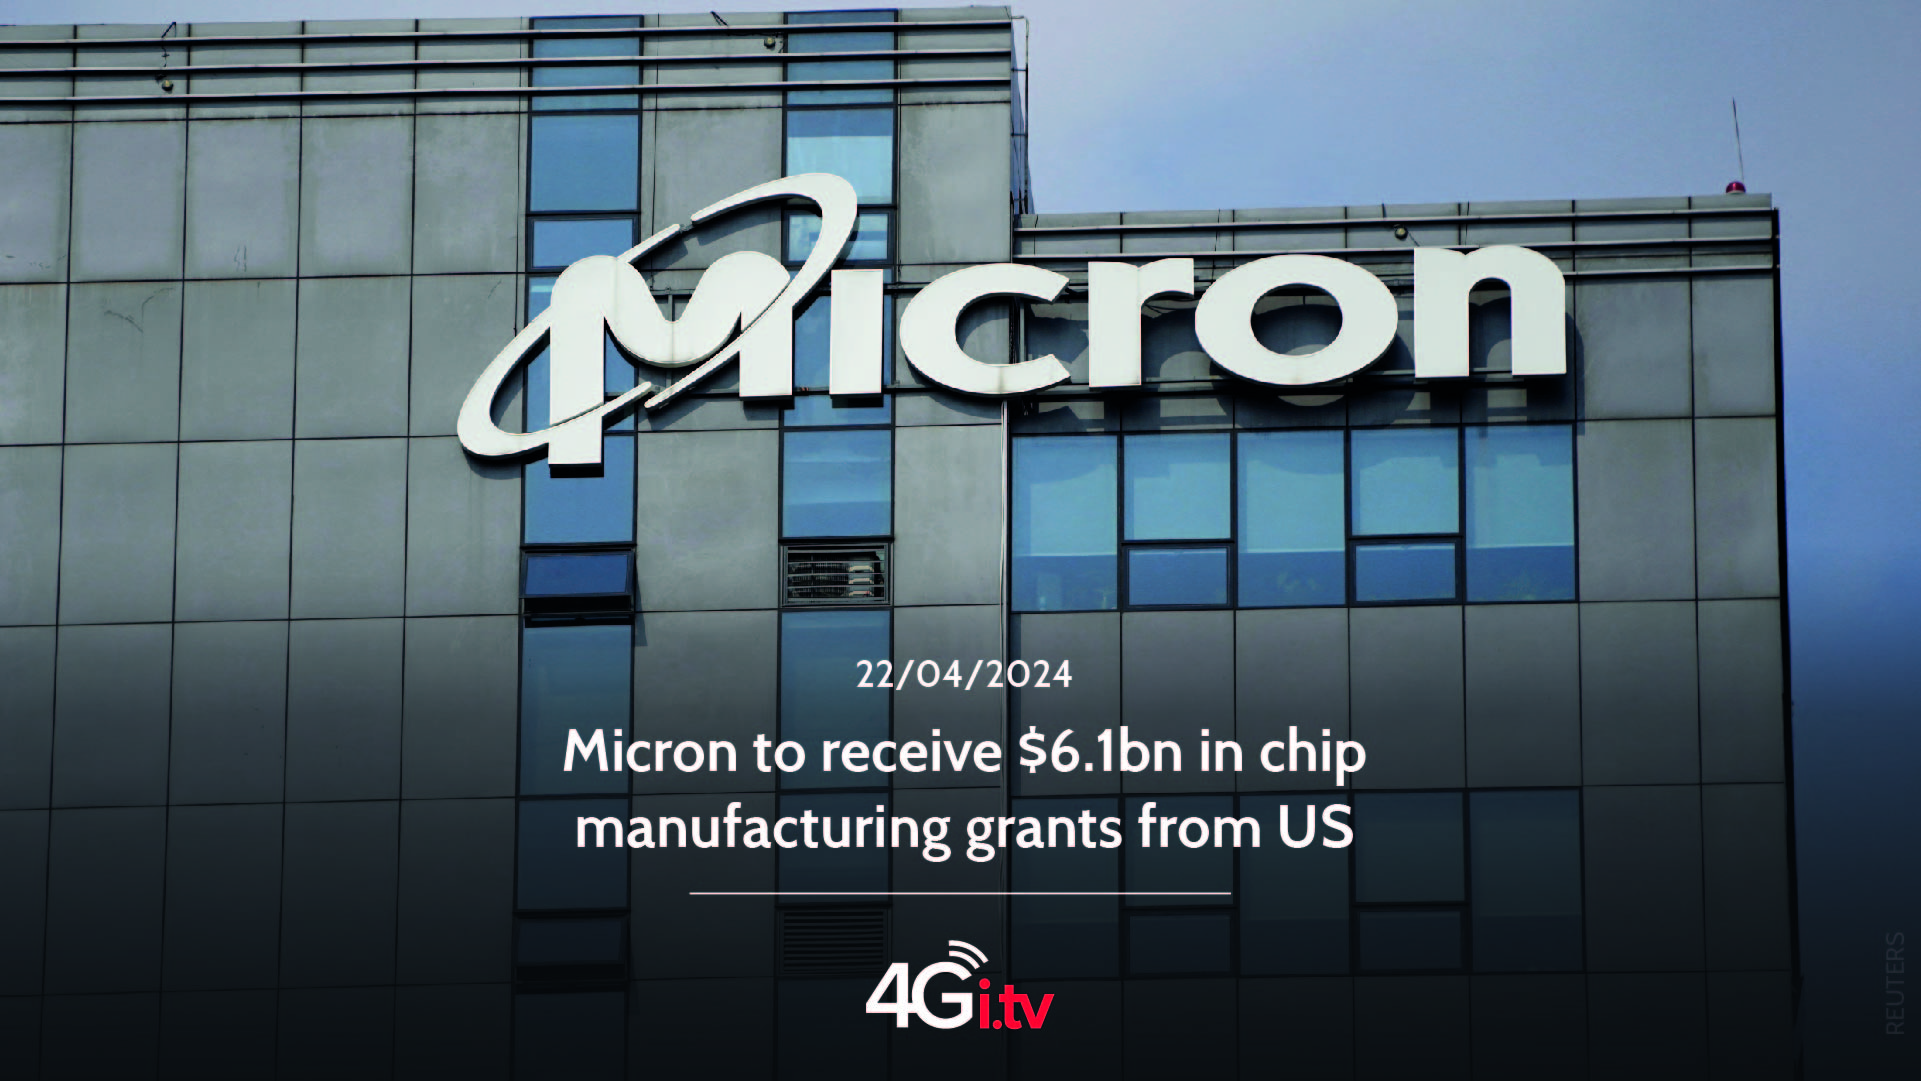 Подробнее о статье Micron to receive $6.1bn in chip manufacturing grants from US